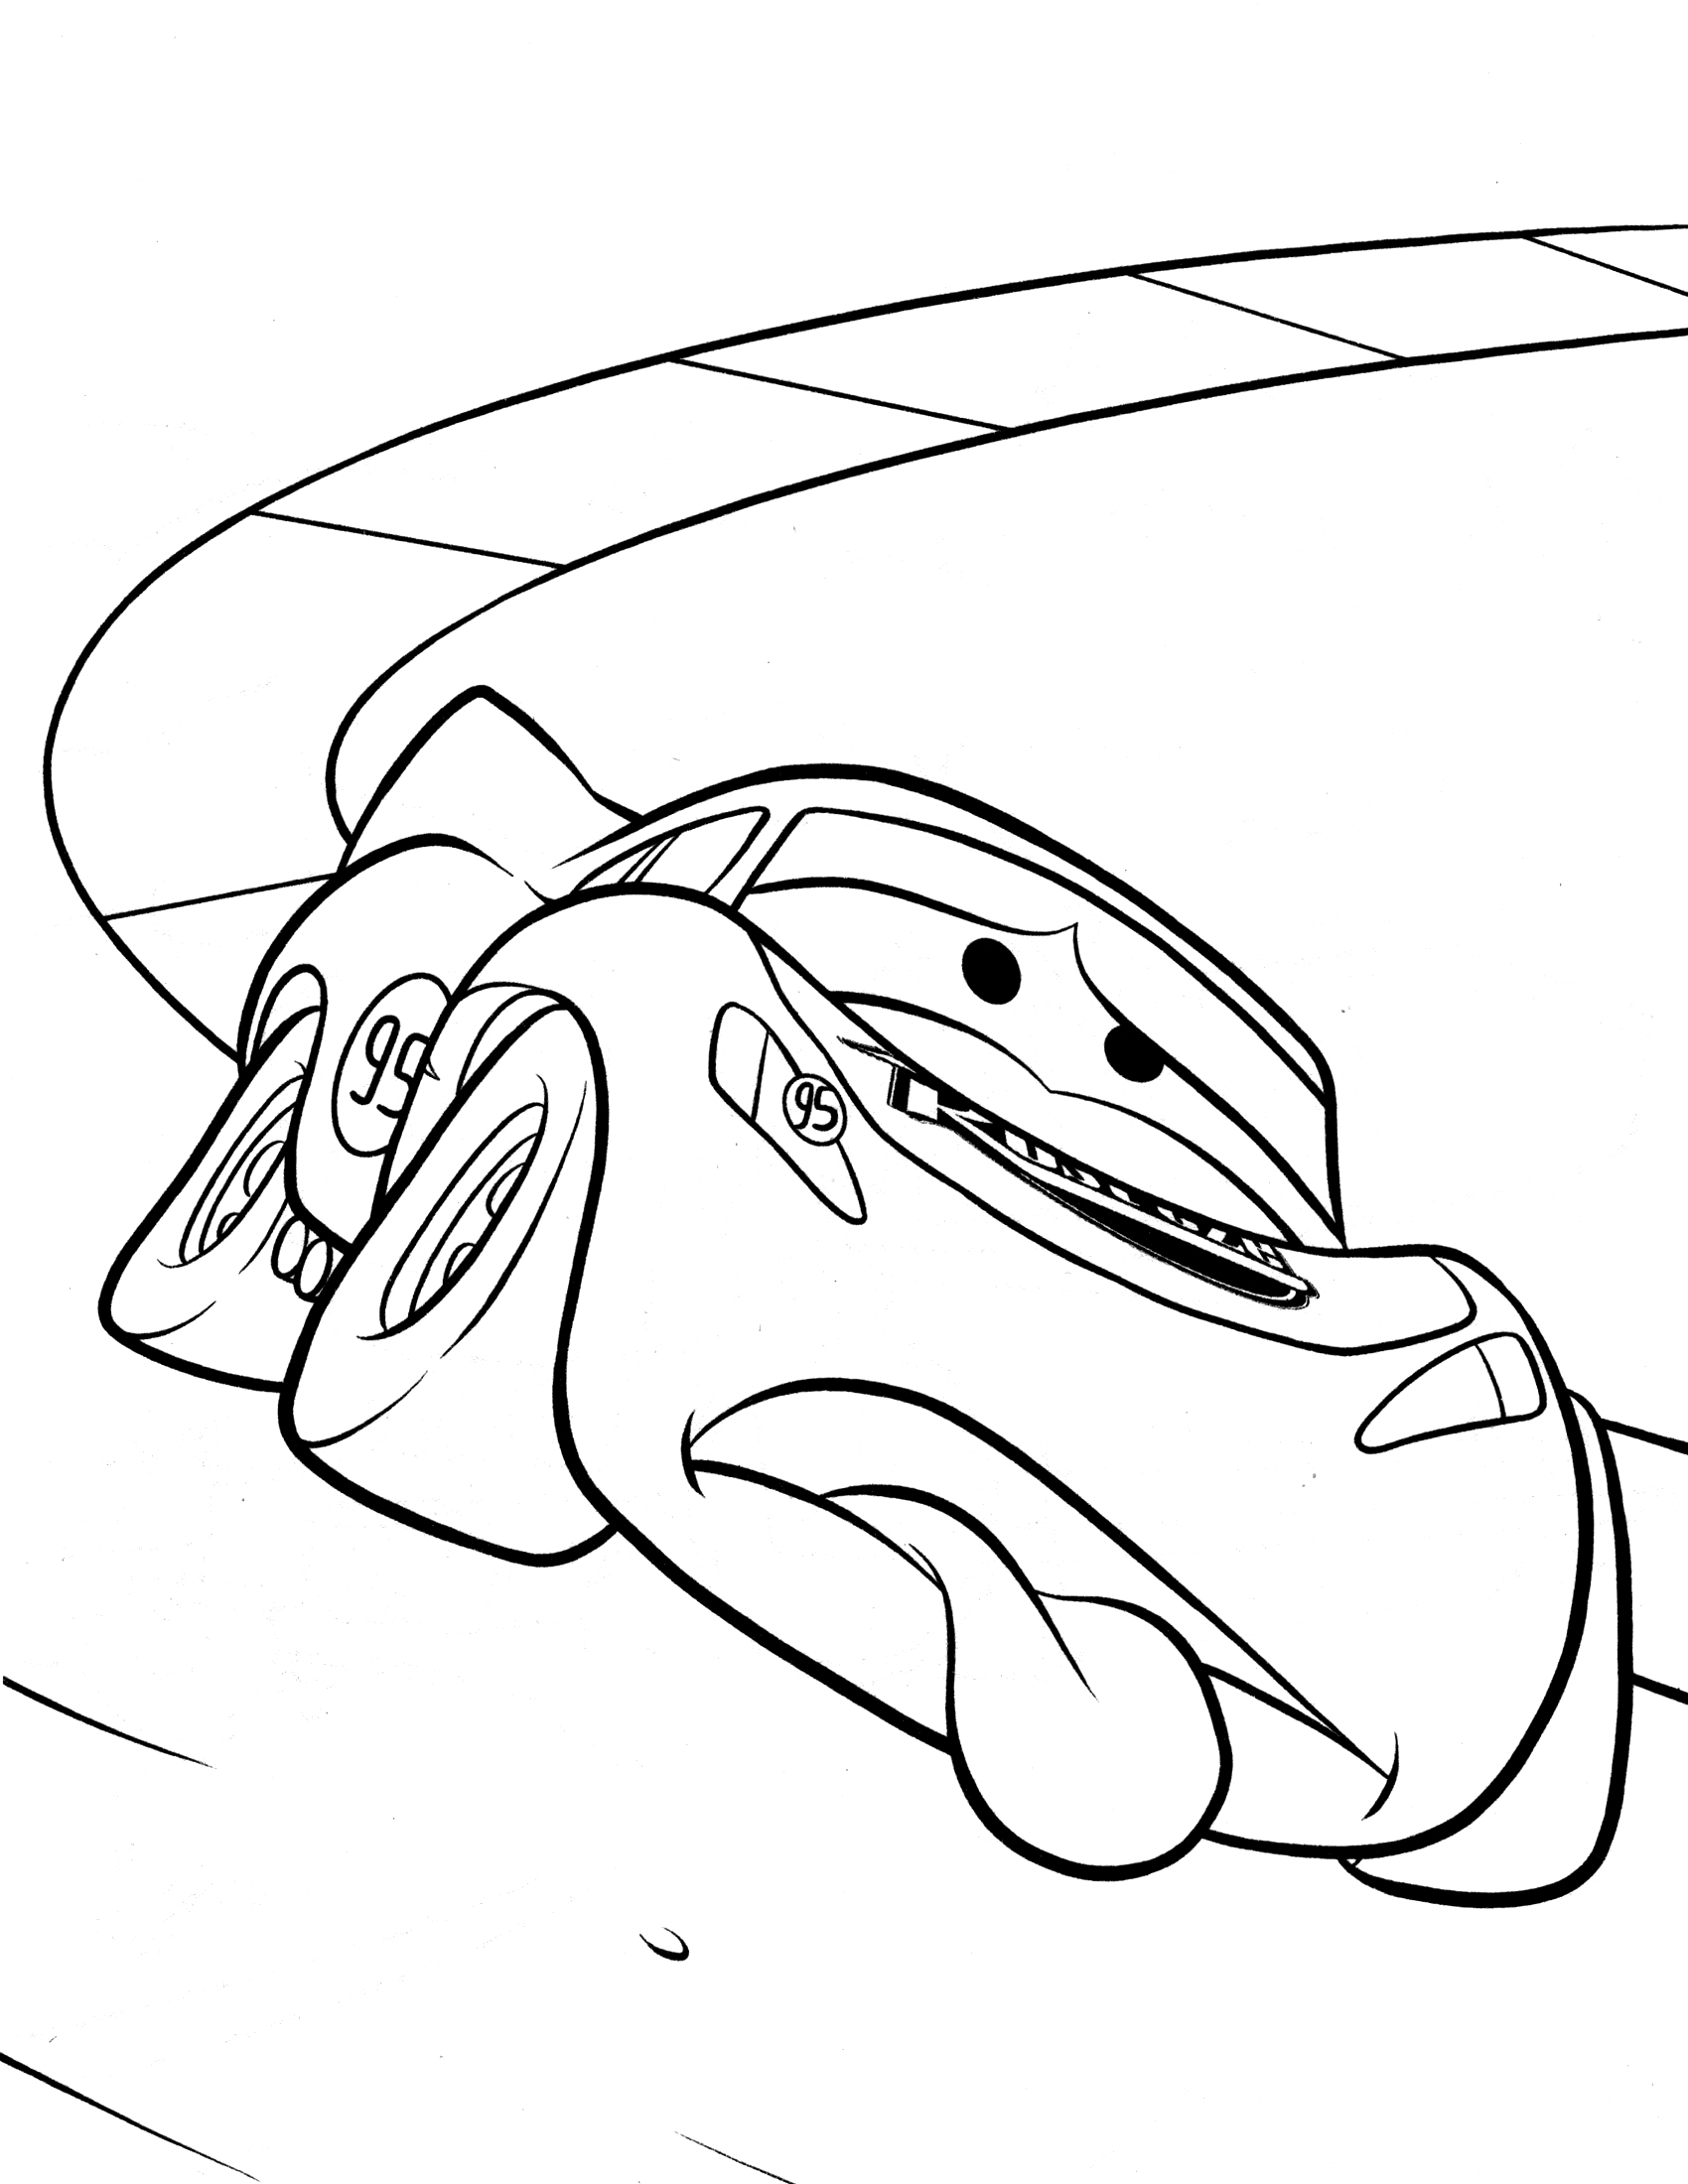 McQueen Is Tired Coloring Page - Free Printable Coloring Pages for Kids